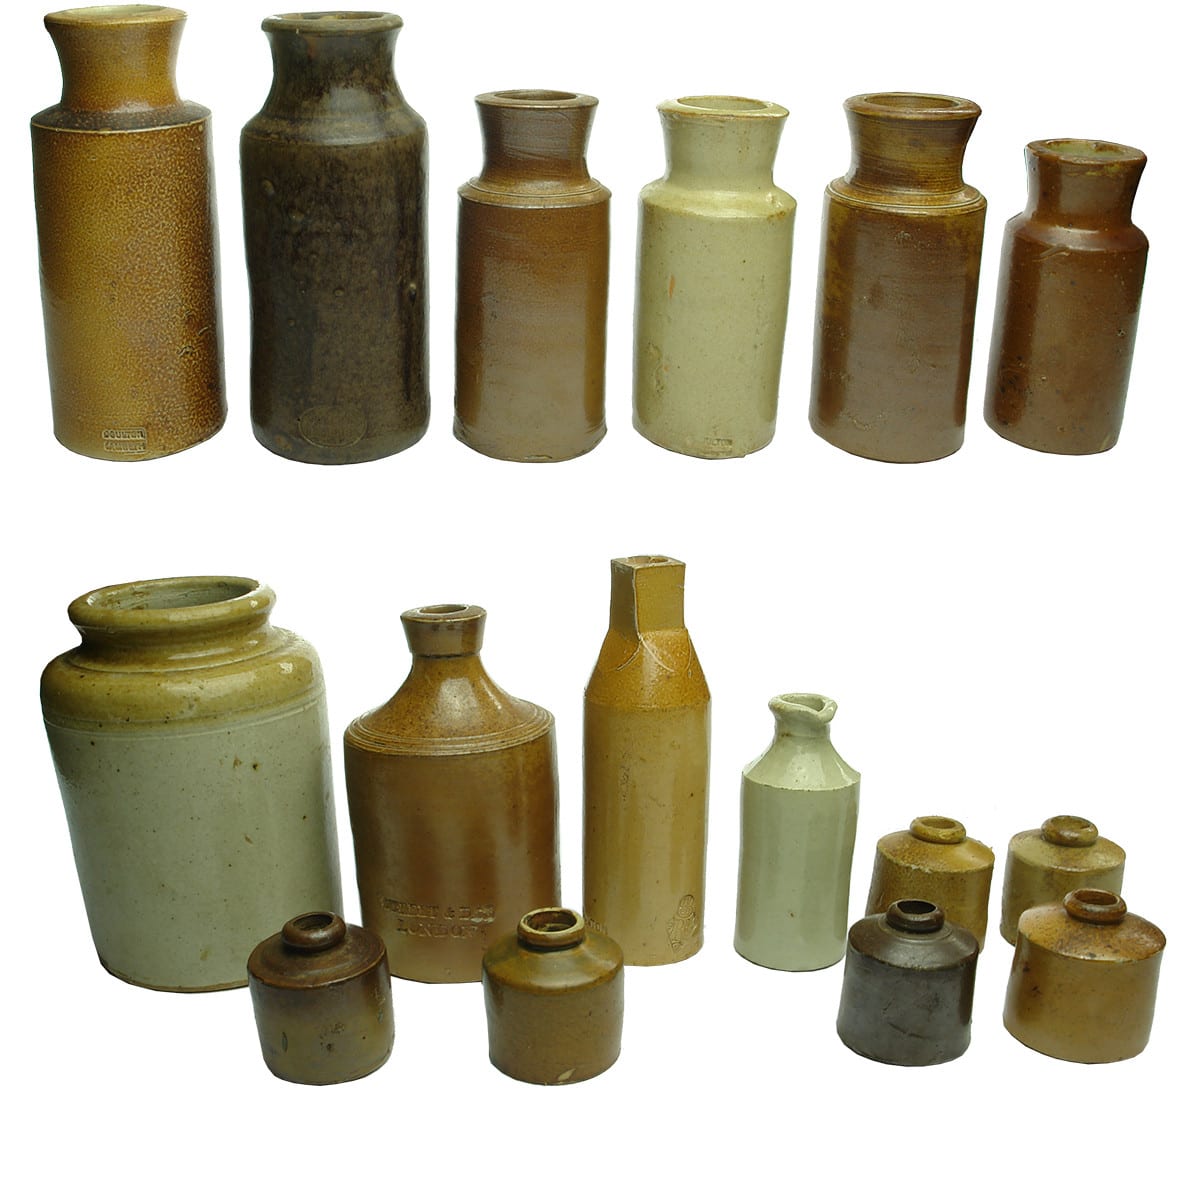 16 pieces of Stoneware. Penny Inks; Blacking Jars; Street & Day; Registered Ink; Vickery's Emulsion.